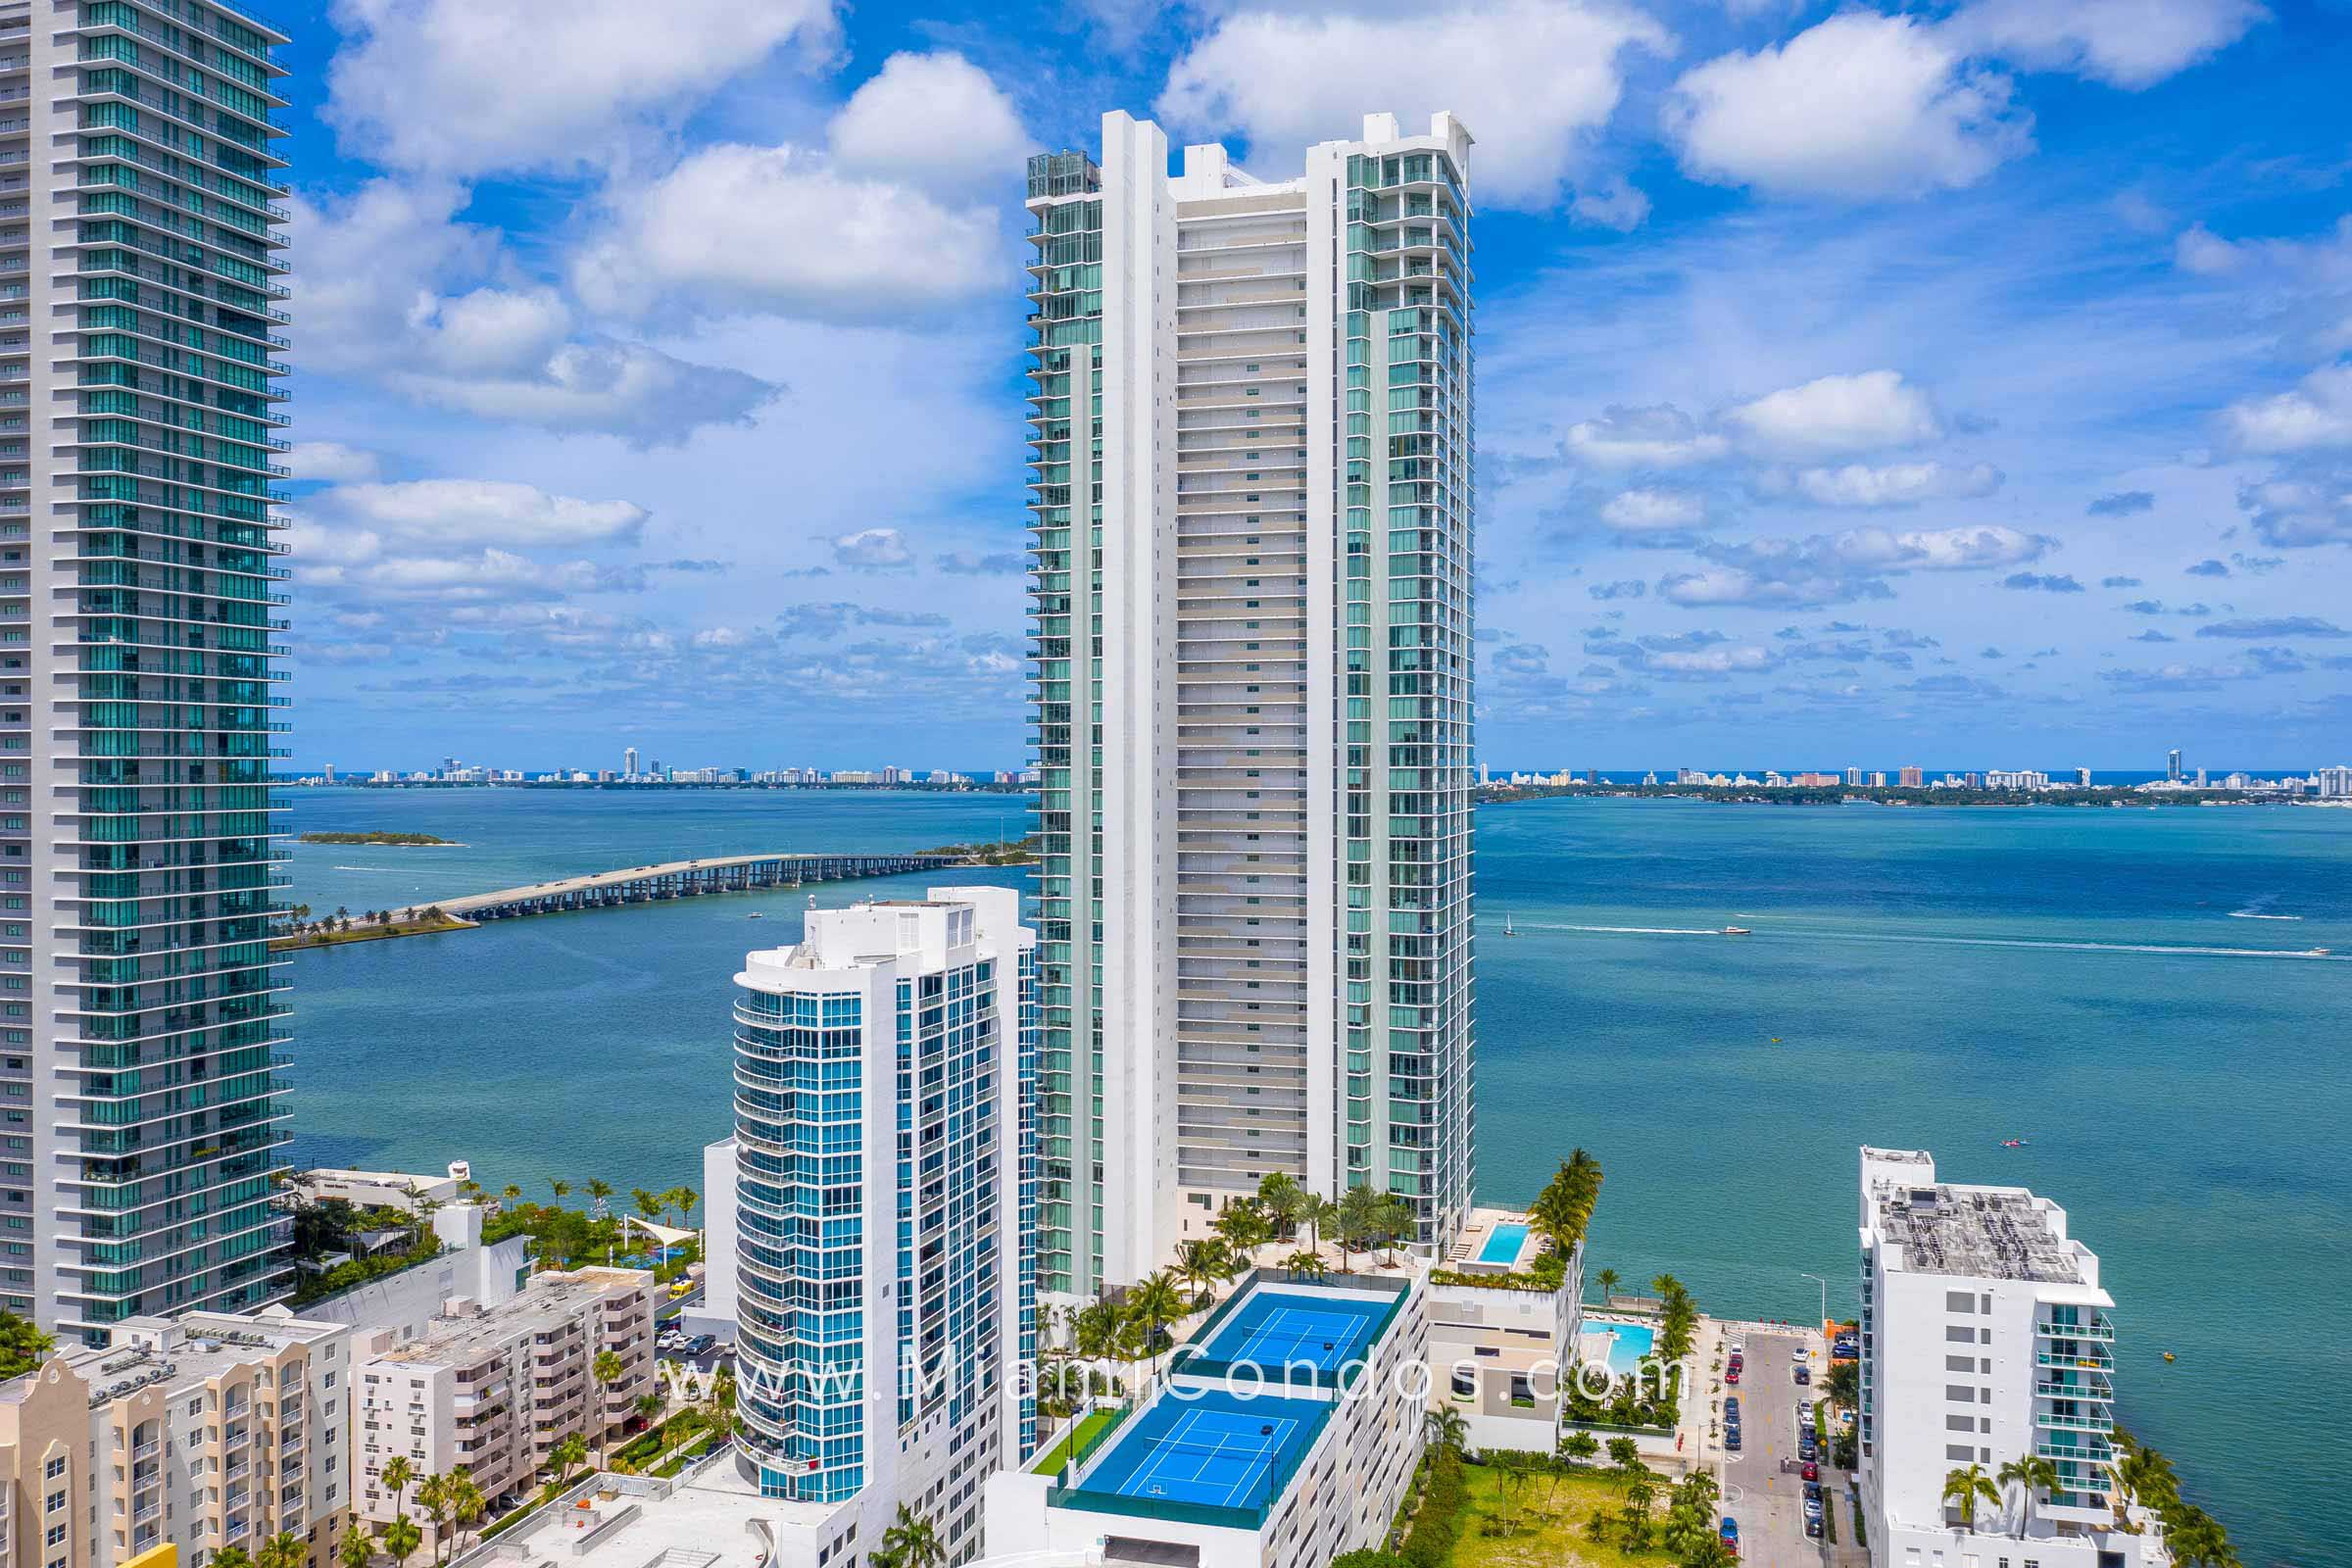 Biscayne Beach in Edgewater